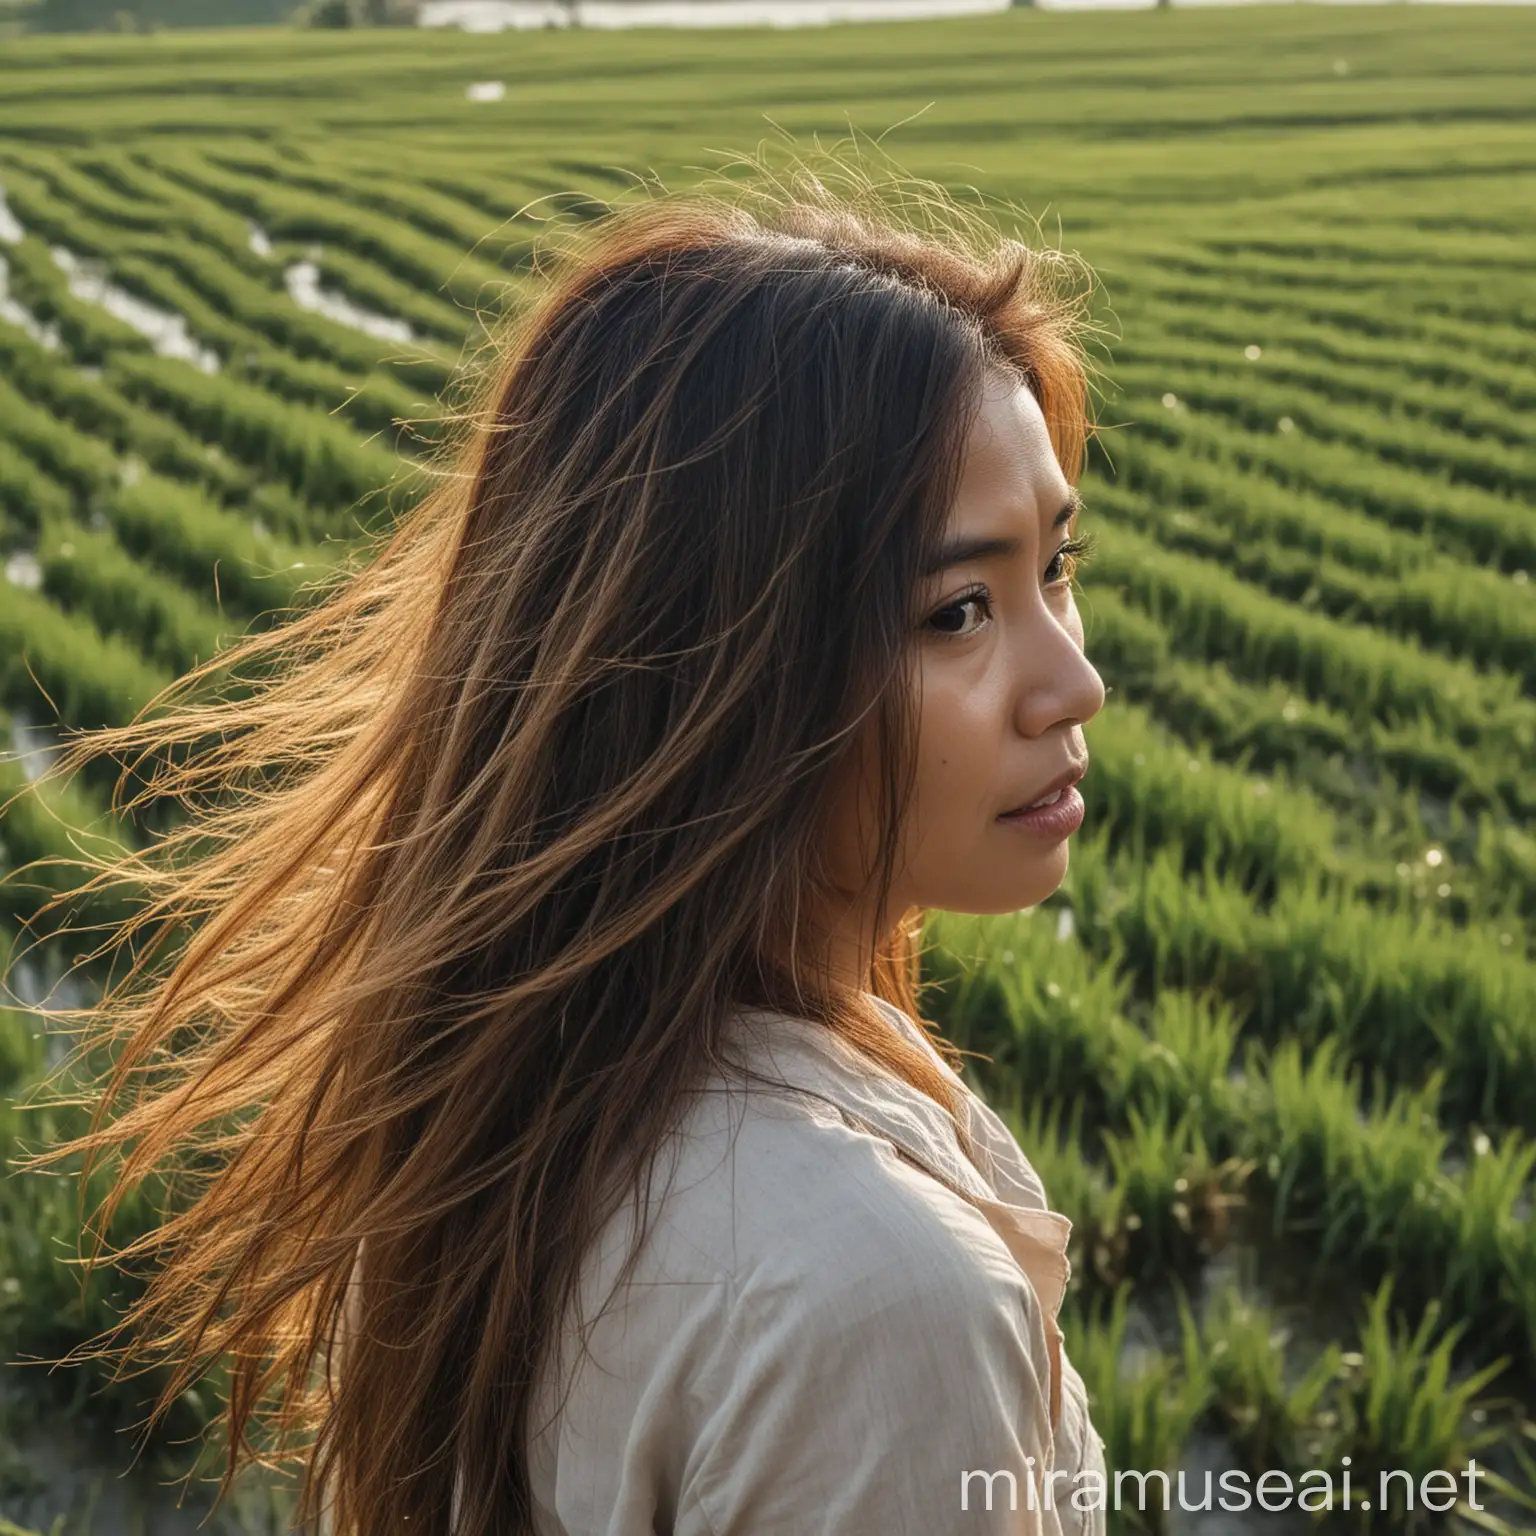 Indonesian Woman Observing Rice Fields